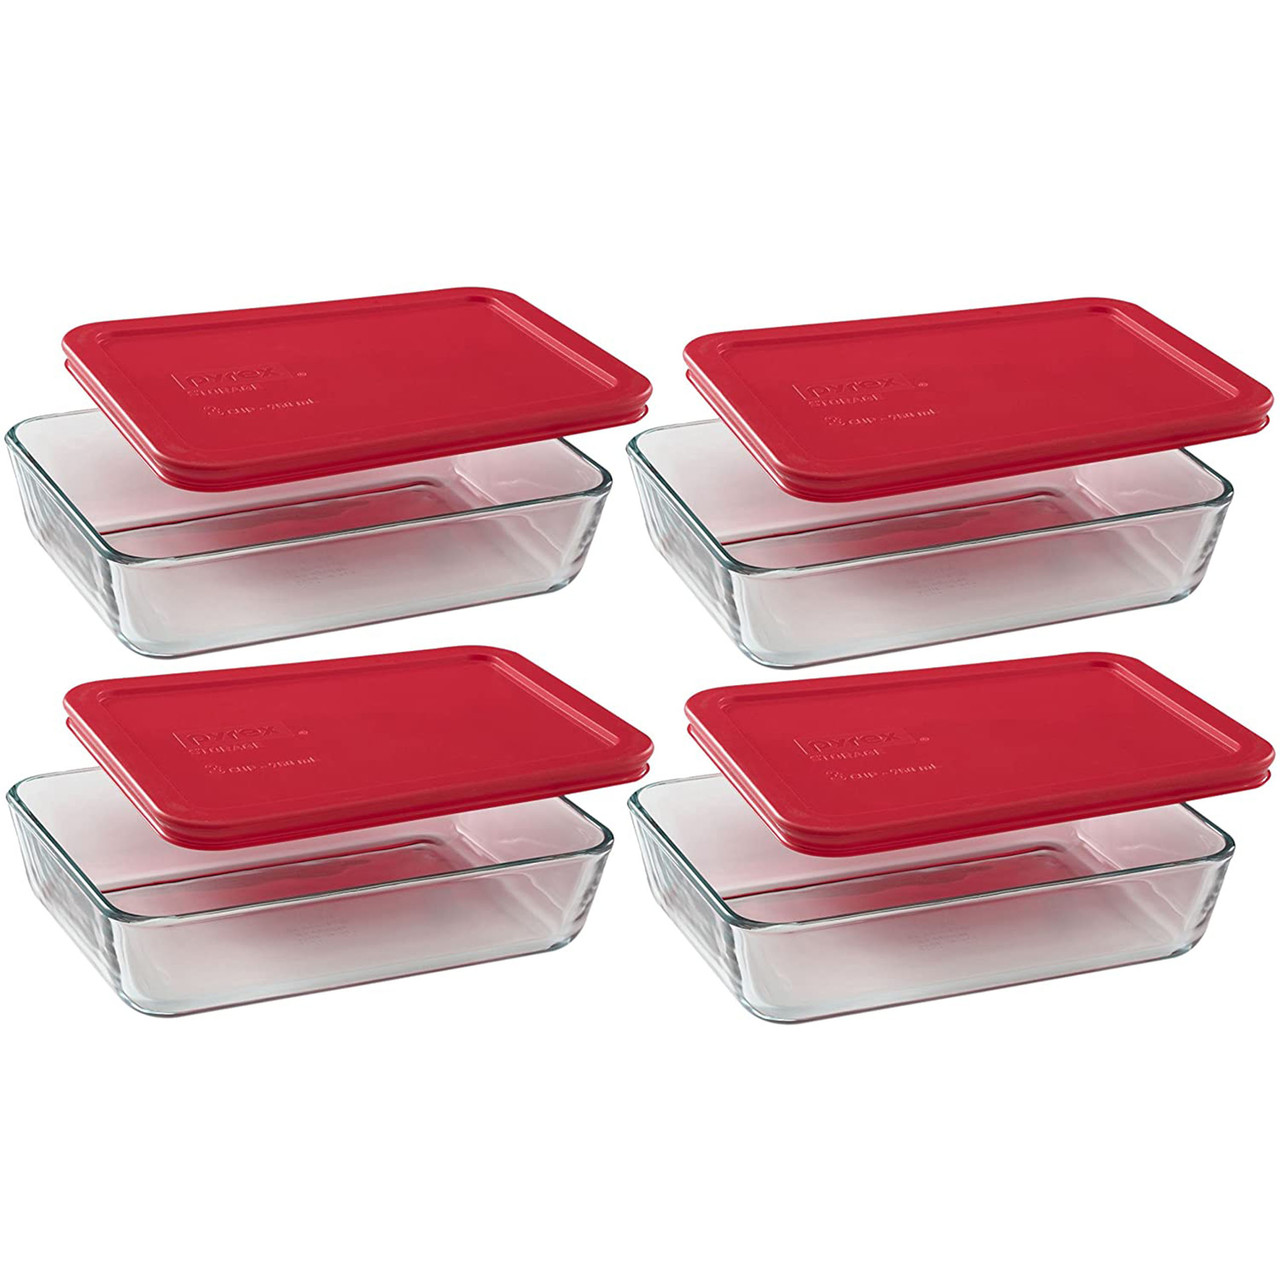  Pyrex 7210-PC 3-Cup Red Plastic Food Storage Replacement Lid  Cover, Made in the USA - 4 Pack: Home & Kitchen